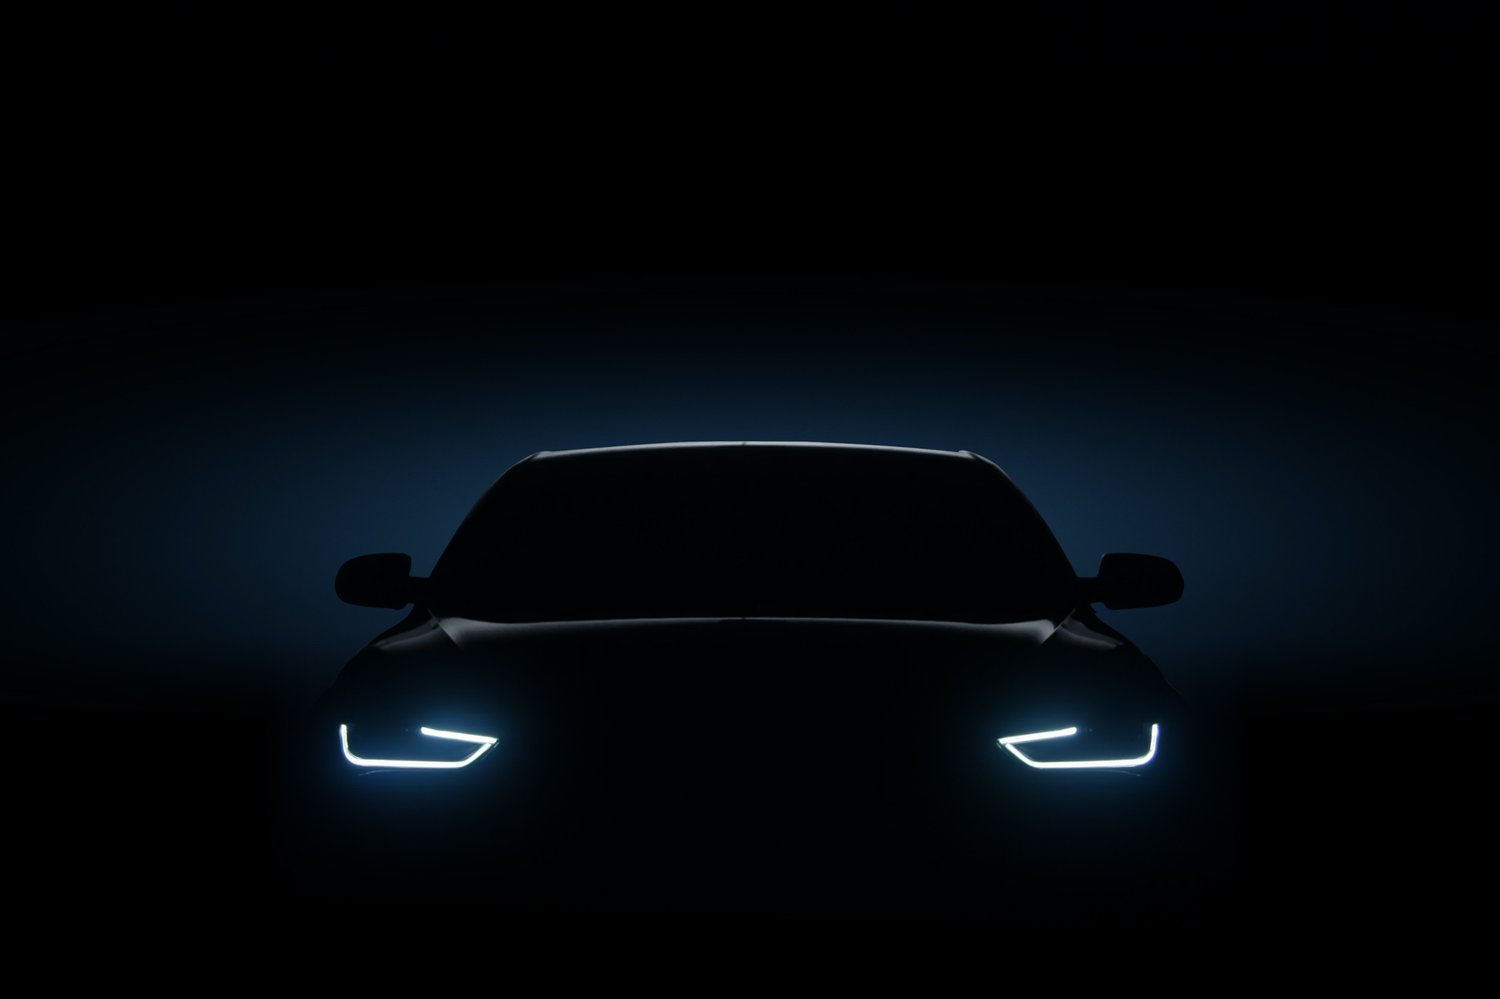 Car in the dark with headlights on